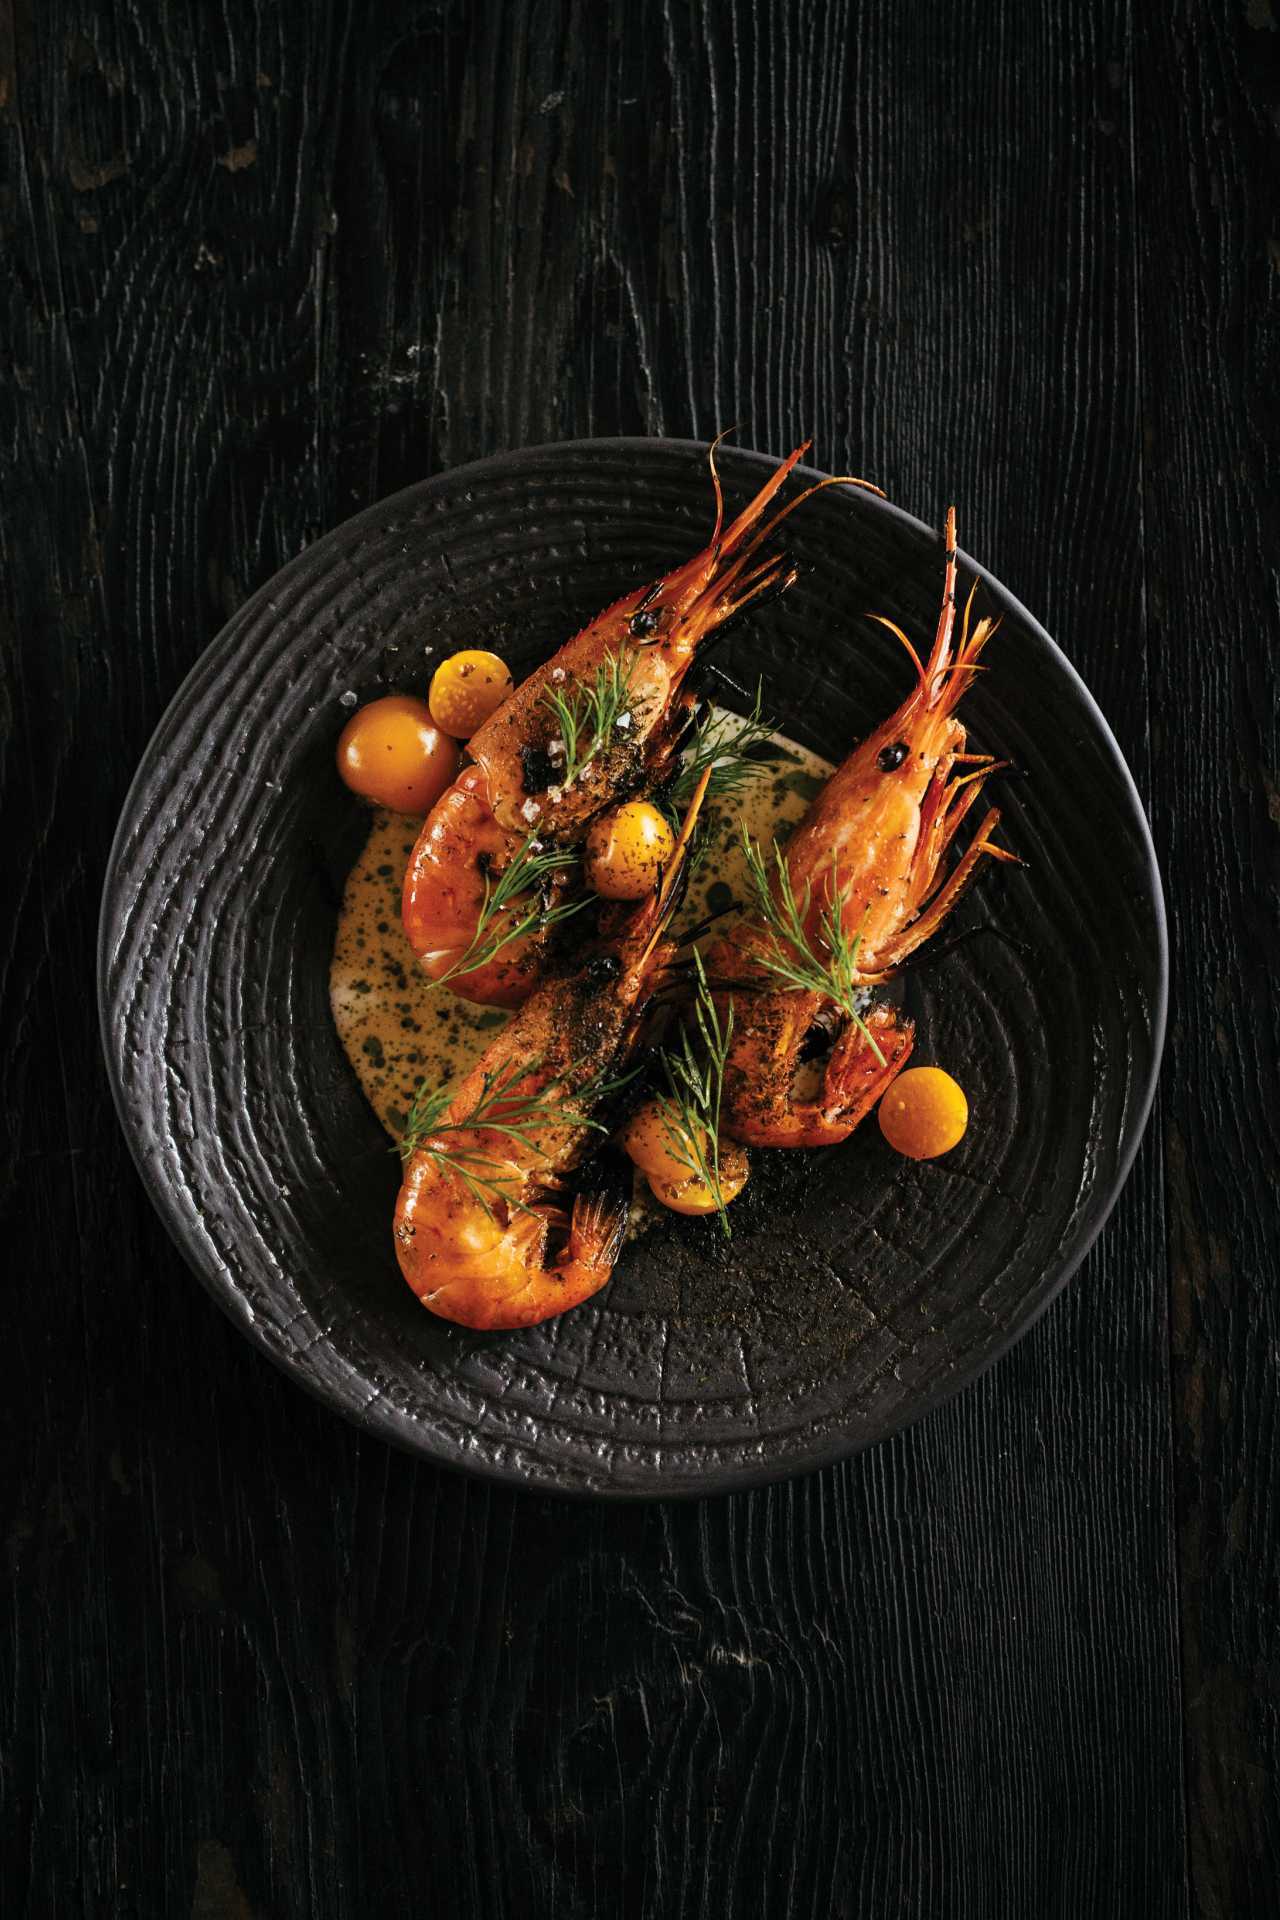 Seaweed benefits | Spot prawns served at a floating picnic